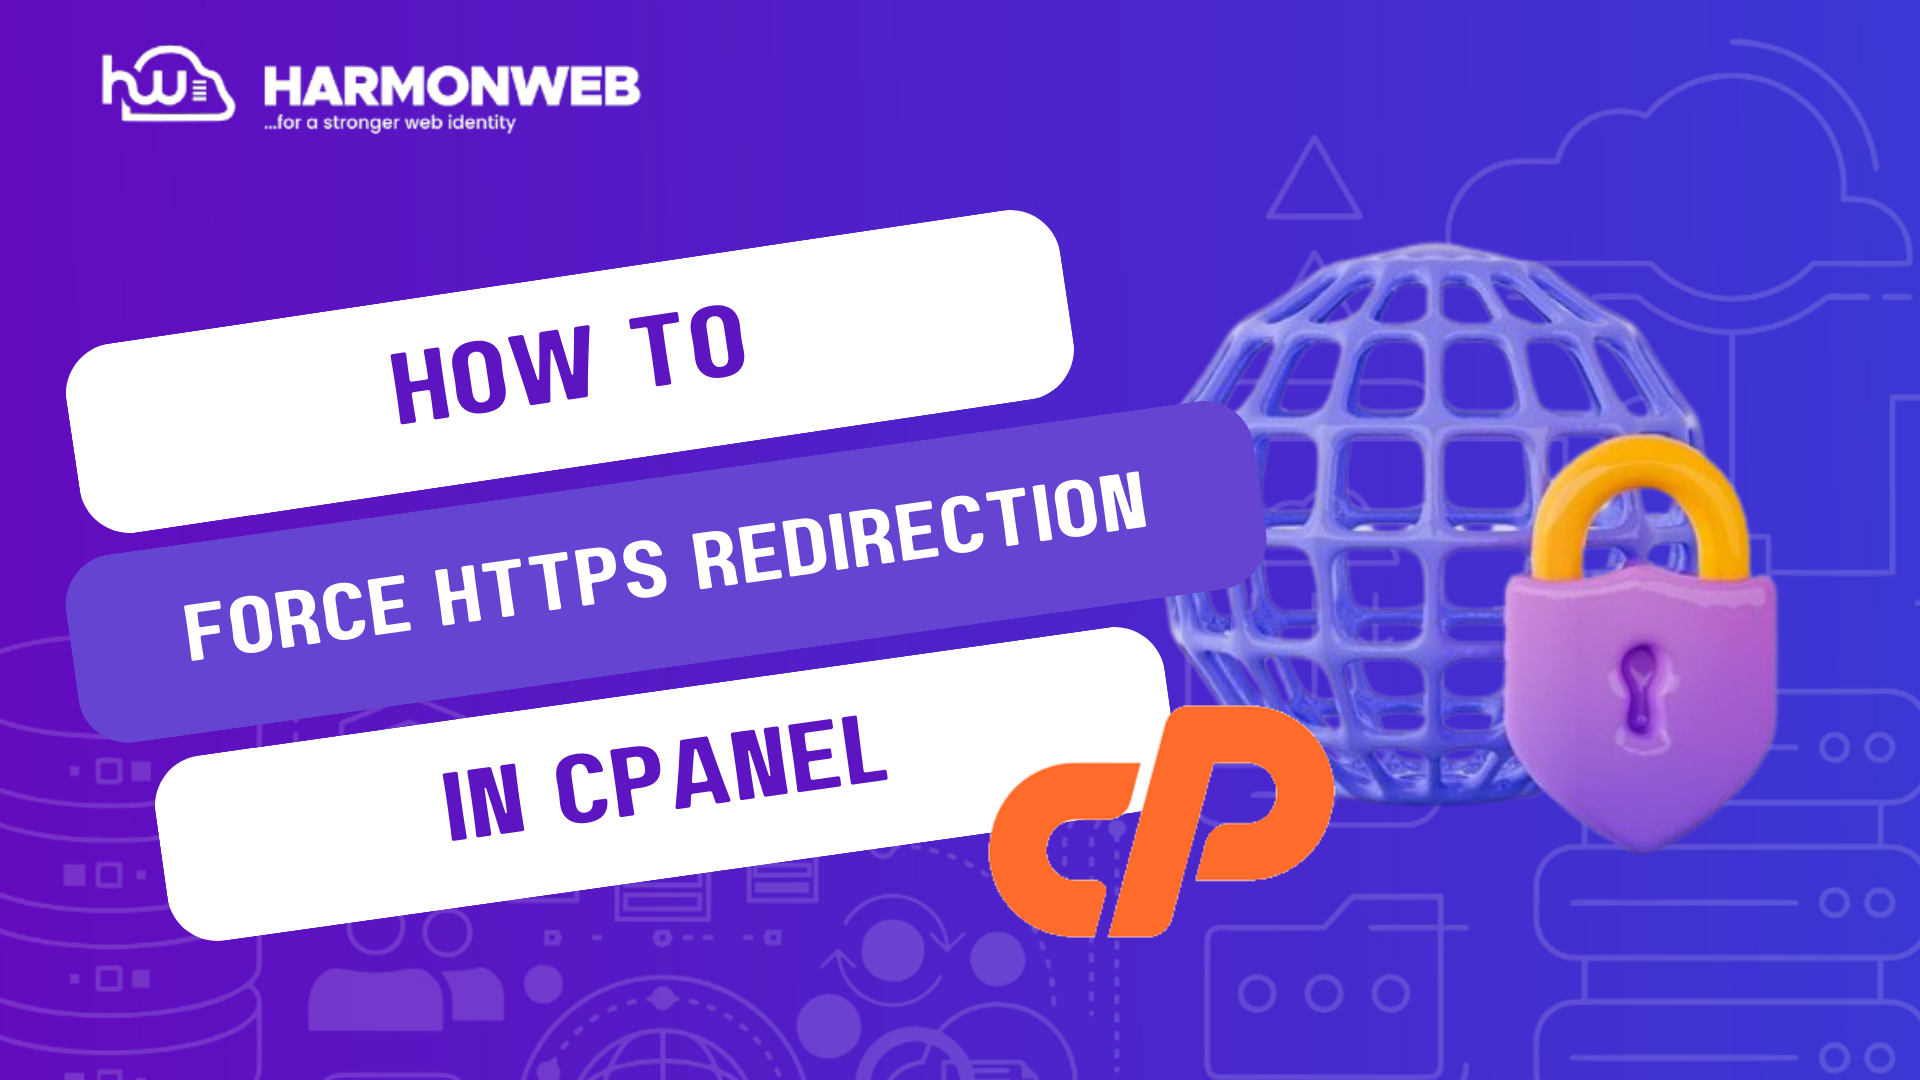 force HTTPS Redirection